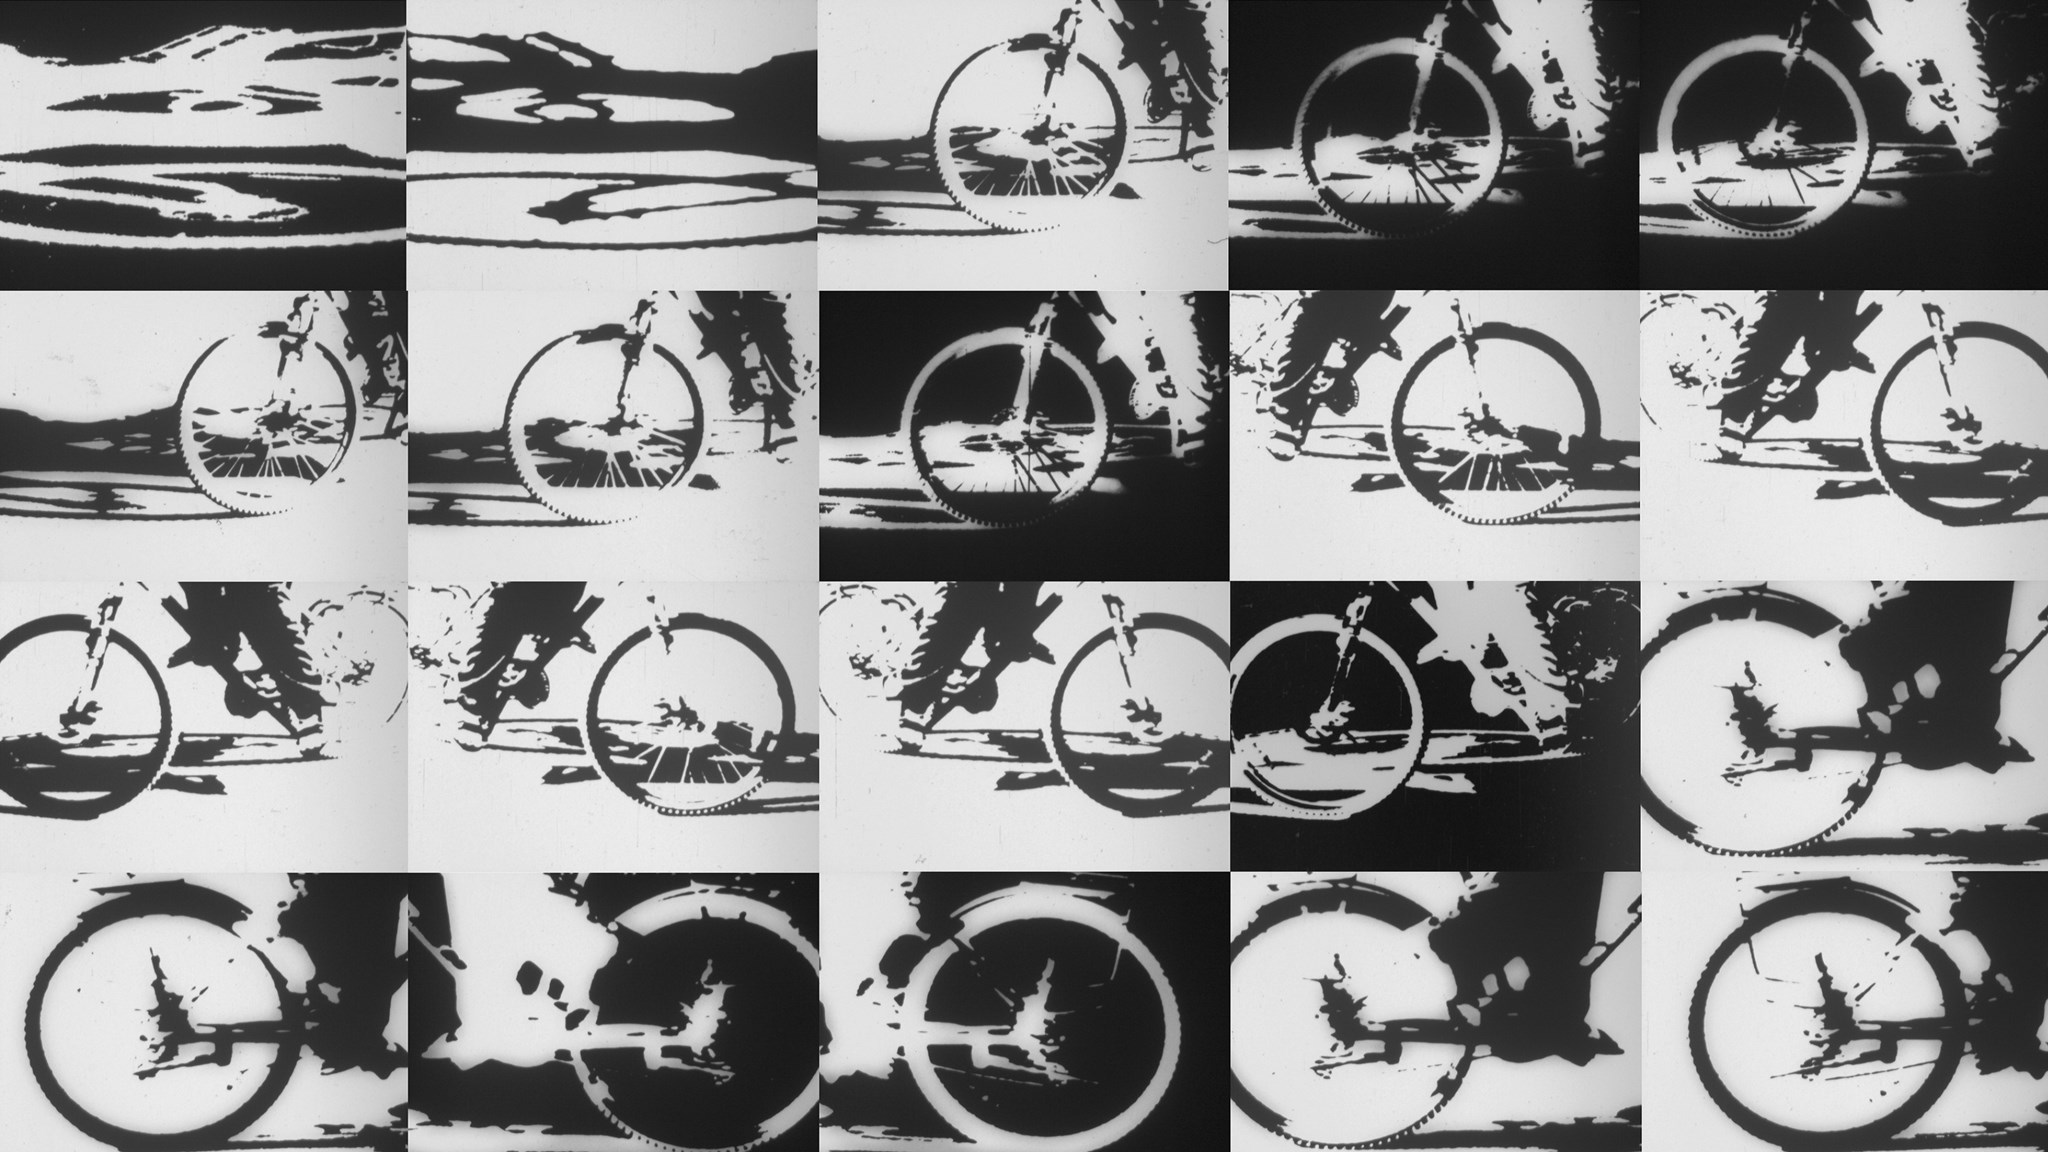 richard tuohy dianna barrie 16mm on the invention of the wheel spoutnik